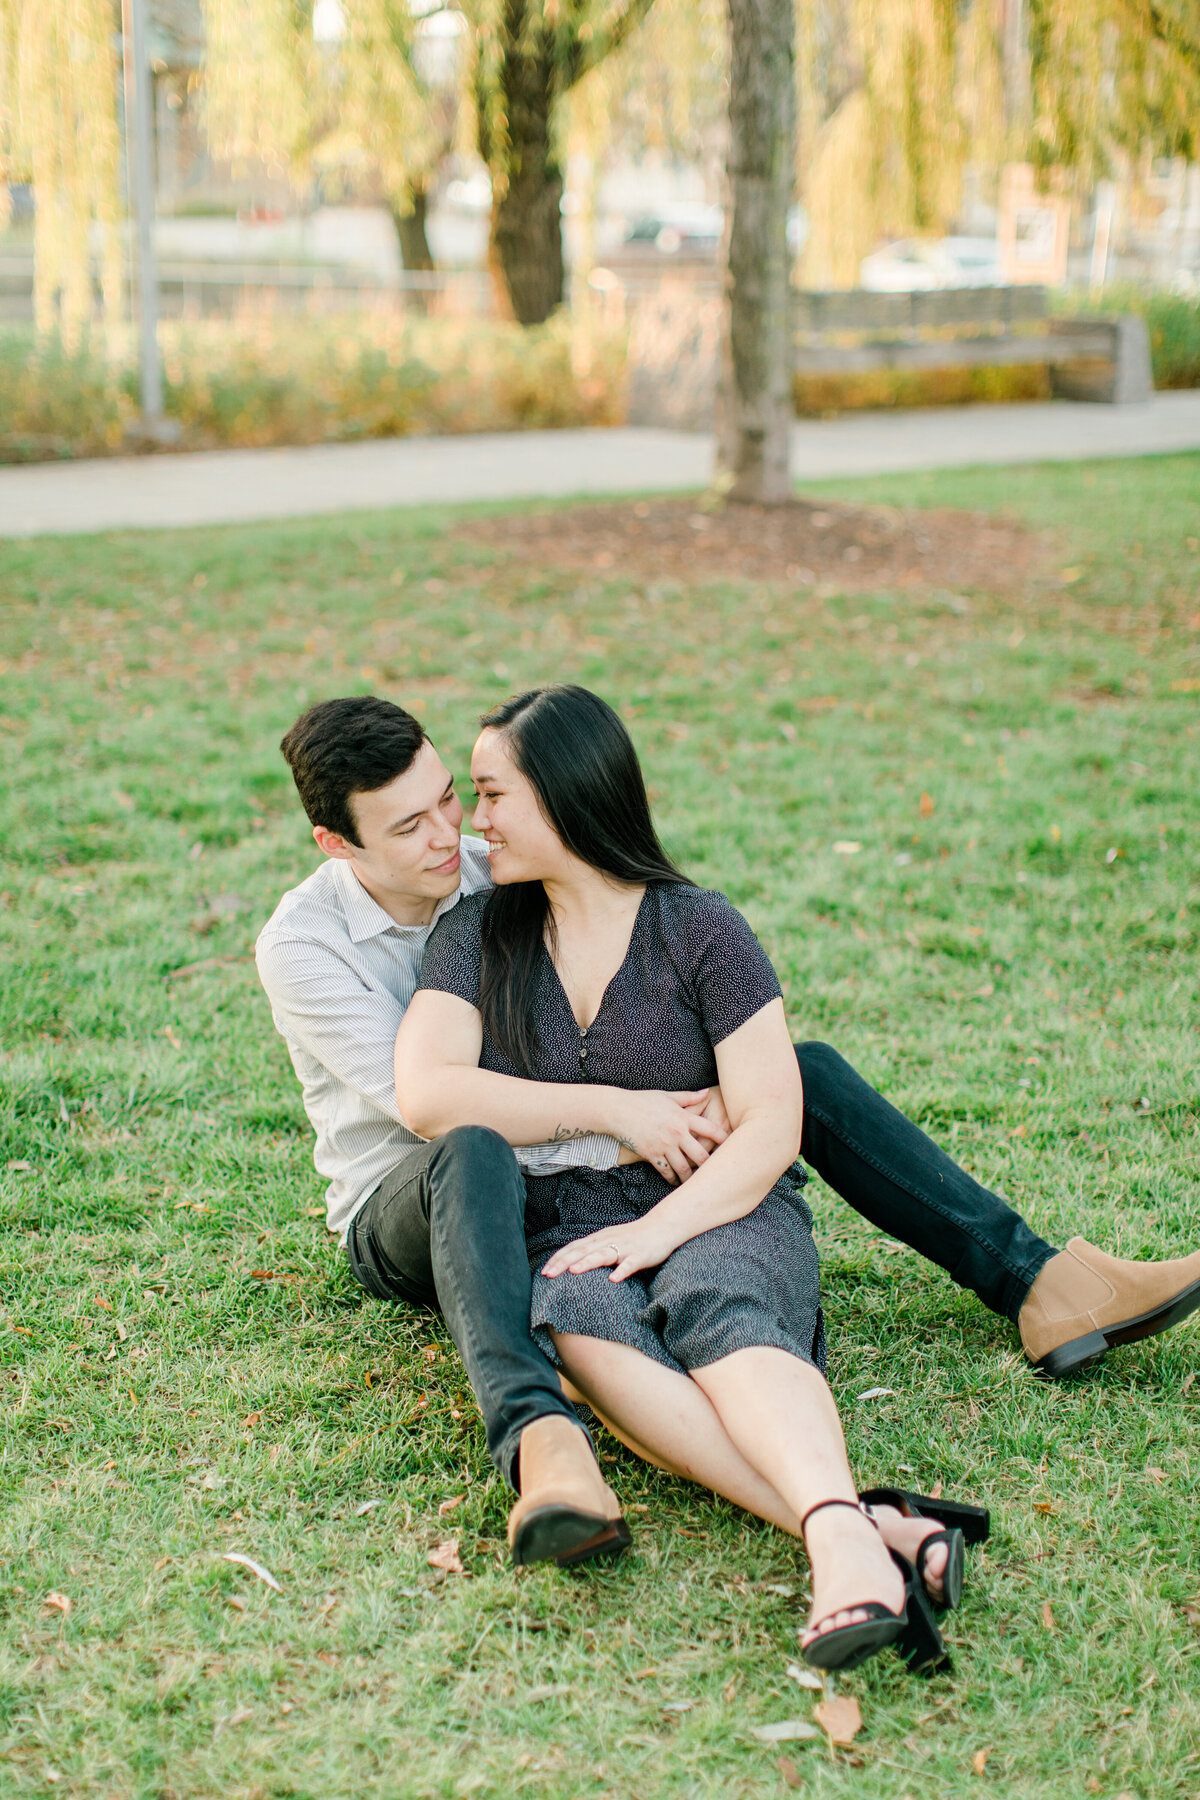 Becky_Collin_Navy_Yards_Park_The_Wharf_Washington_DC_Fall_Engagement_Session_AngelikaJohnsPhotography-7915